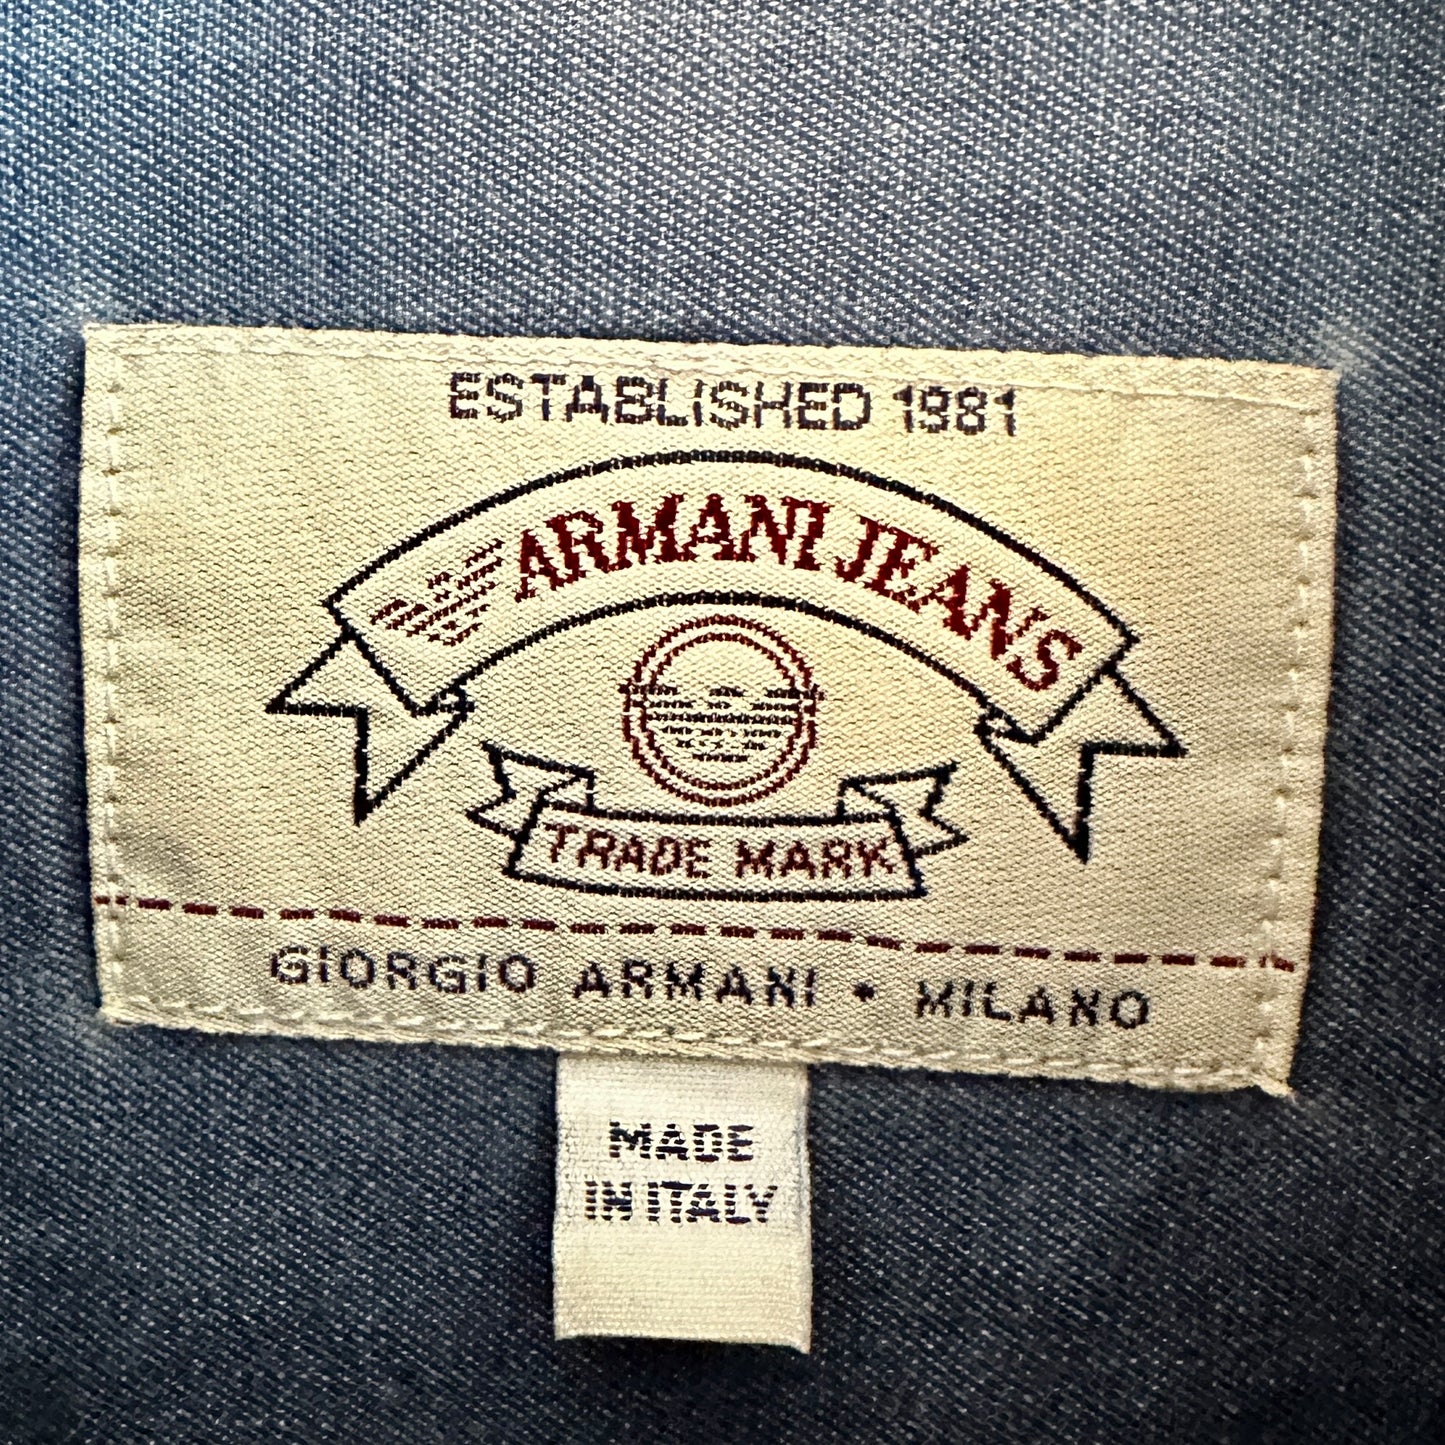 Armani Jeans Vintage 90s Denim Shirt - L - Made in Italy